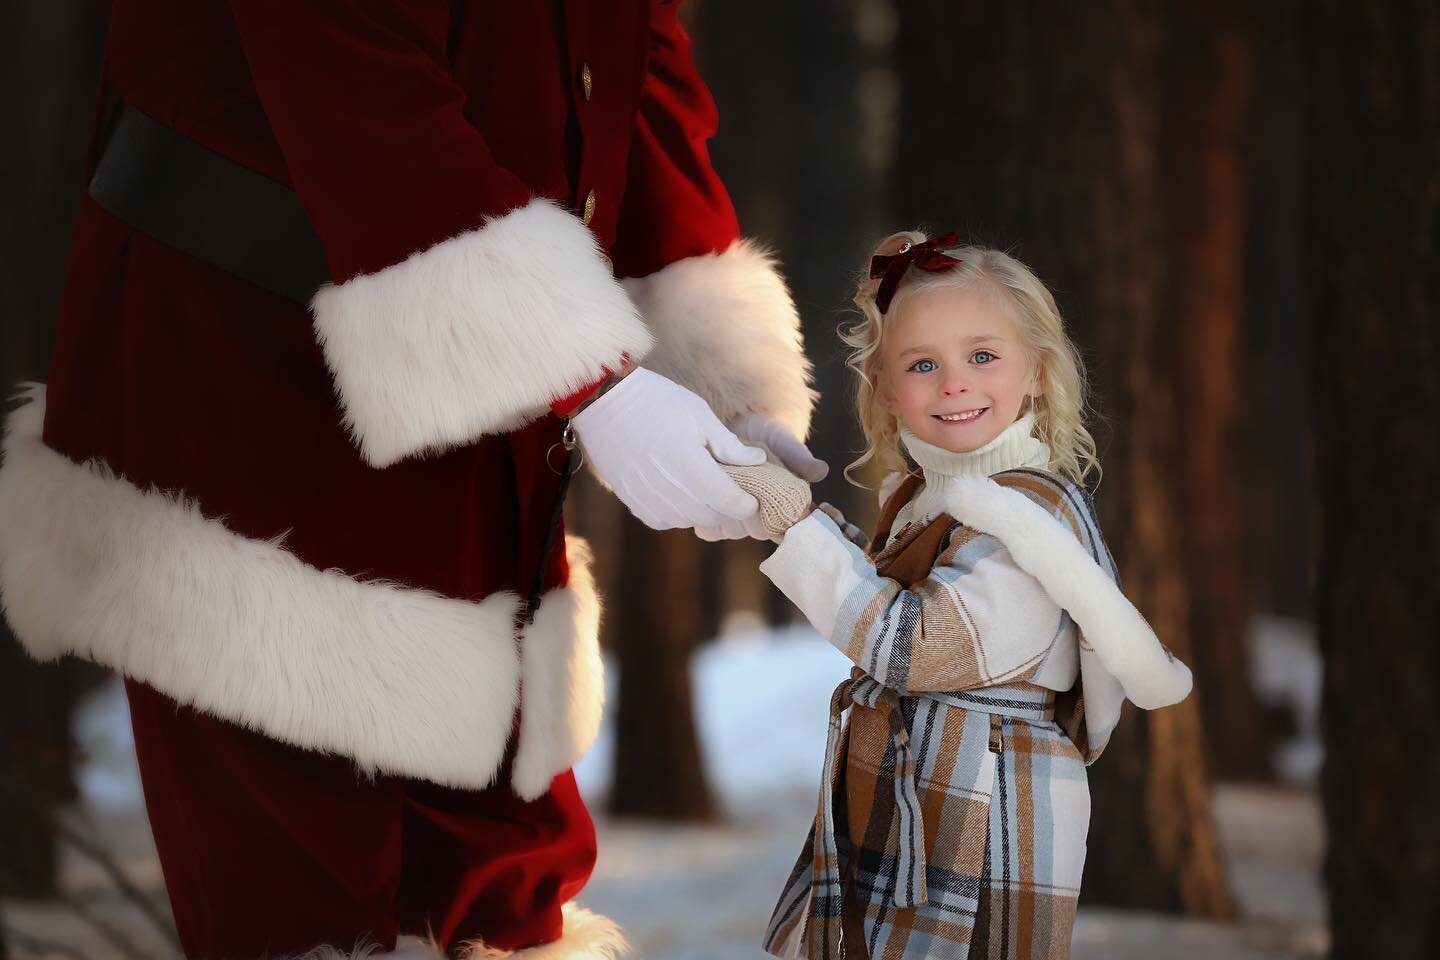 Tandy and I (Hayley) are hard at work getting galleries from our first two family and Santa sessions edited! We should be done with all photos from November 12th by end of day today- we still have lots to share with you! 42 families so far and our he